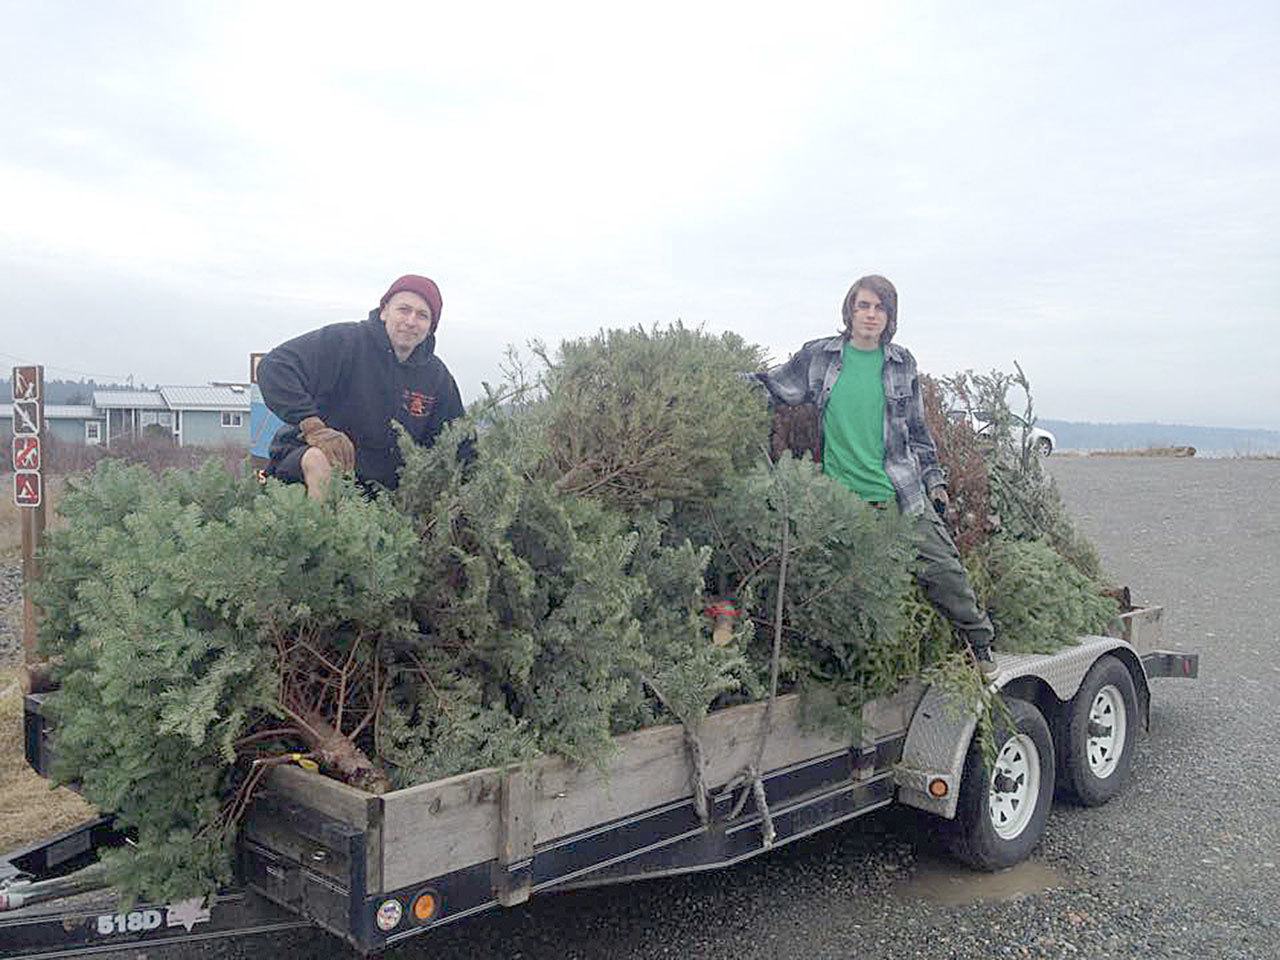 Photo provided by Angi Carlson                                After retrieving used Chirstmas trees from local residents, former Boy Scouts of Coupeville Troop 4058 Cody Menges, at left, and Dominique Norberg climb a trailer full of discarded trees in order to make them fit for the trip to the Coupeville dump, where they were to be recycled in the “clean green” section of the facility.